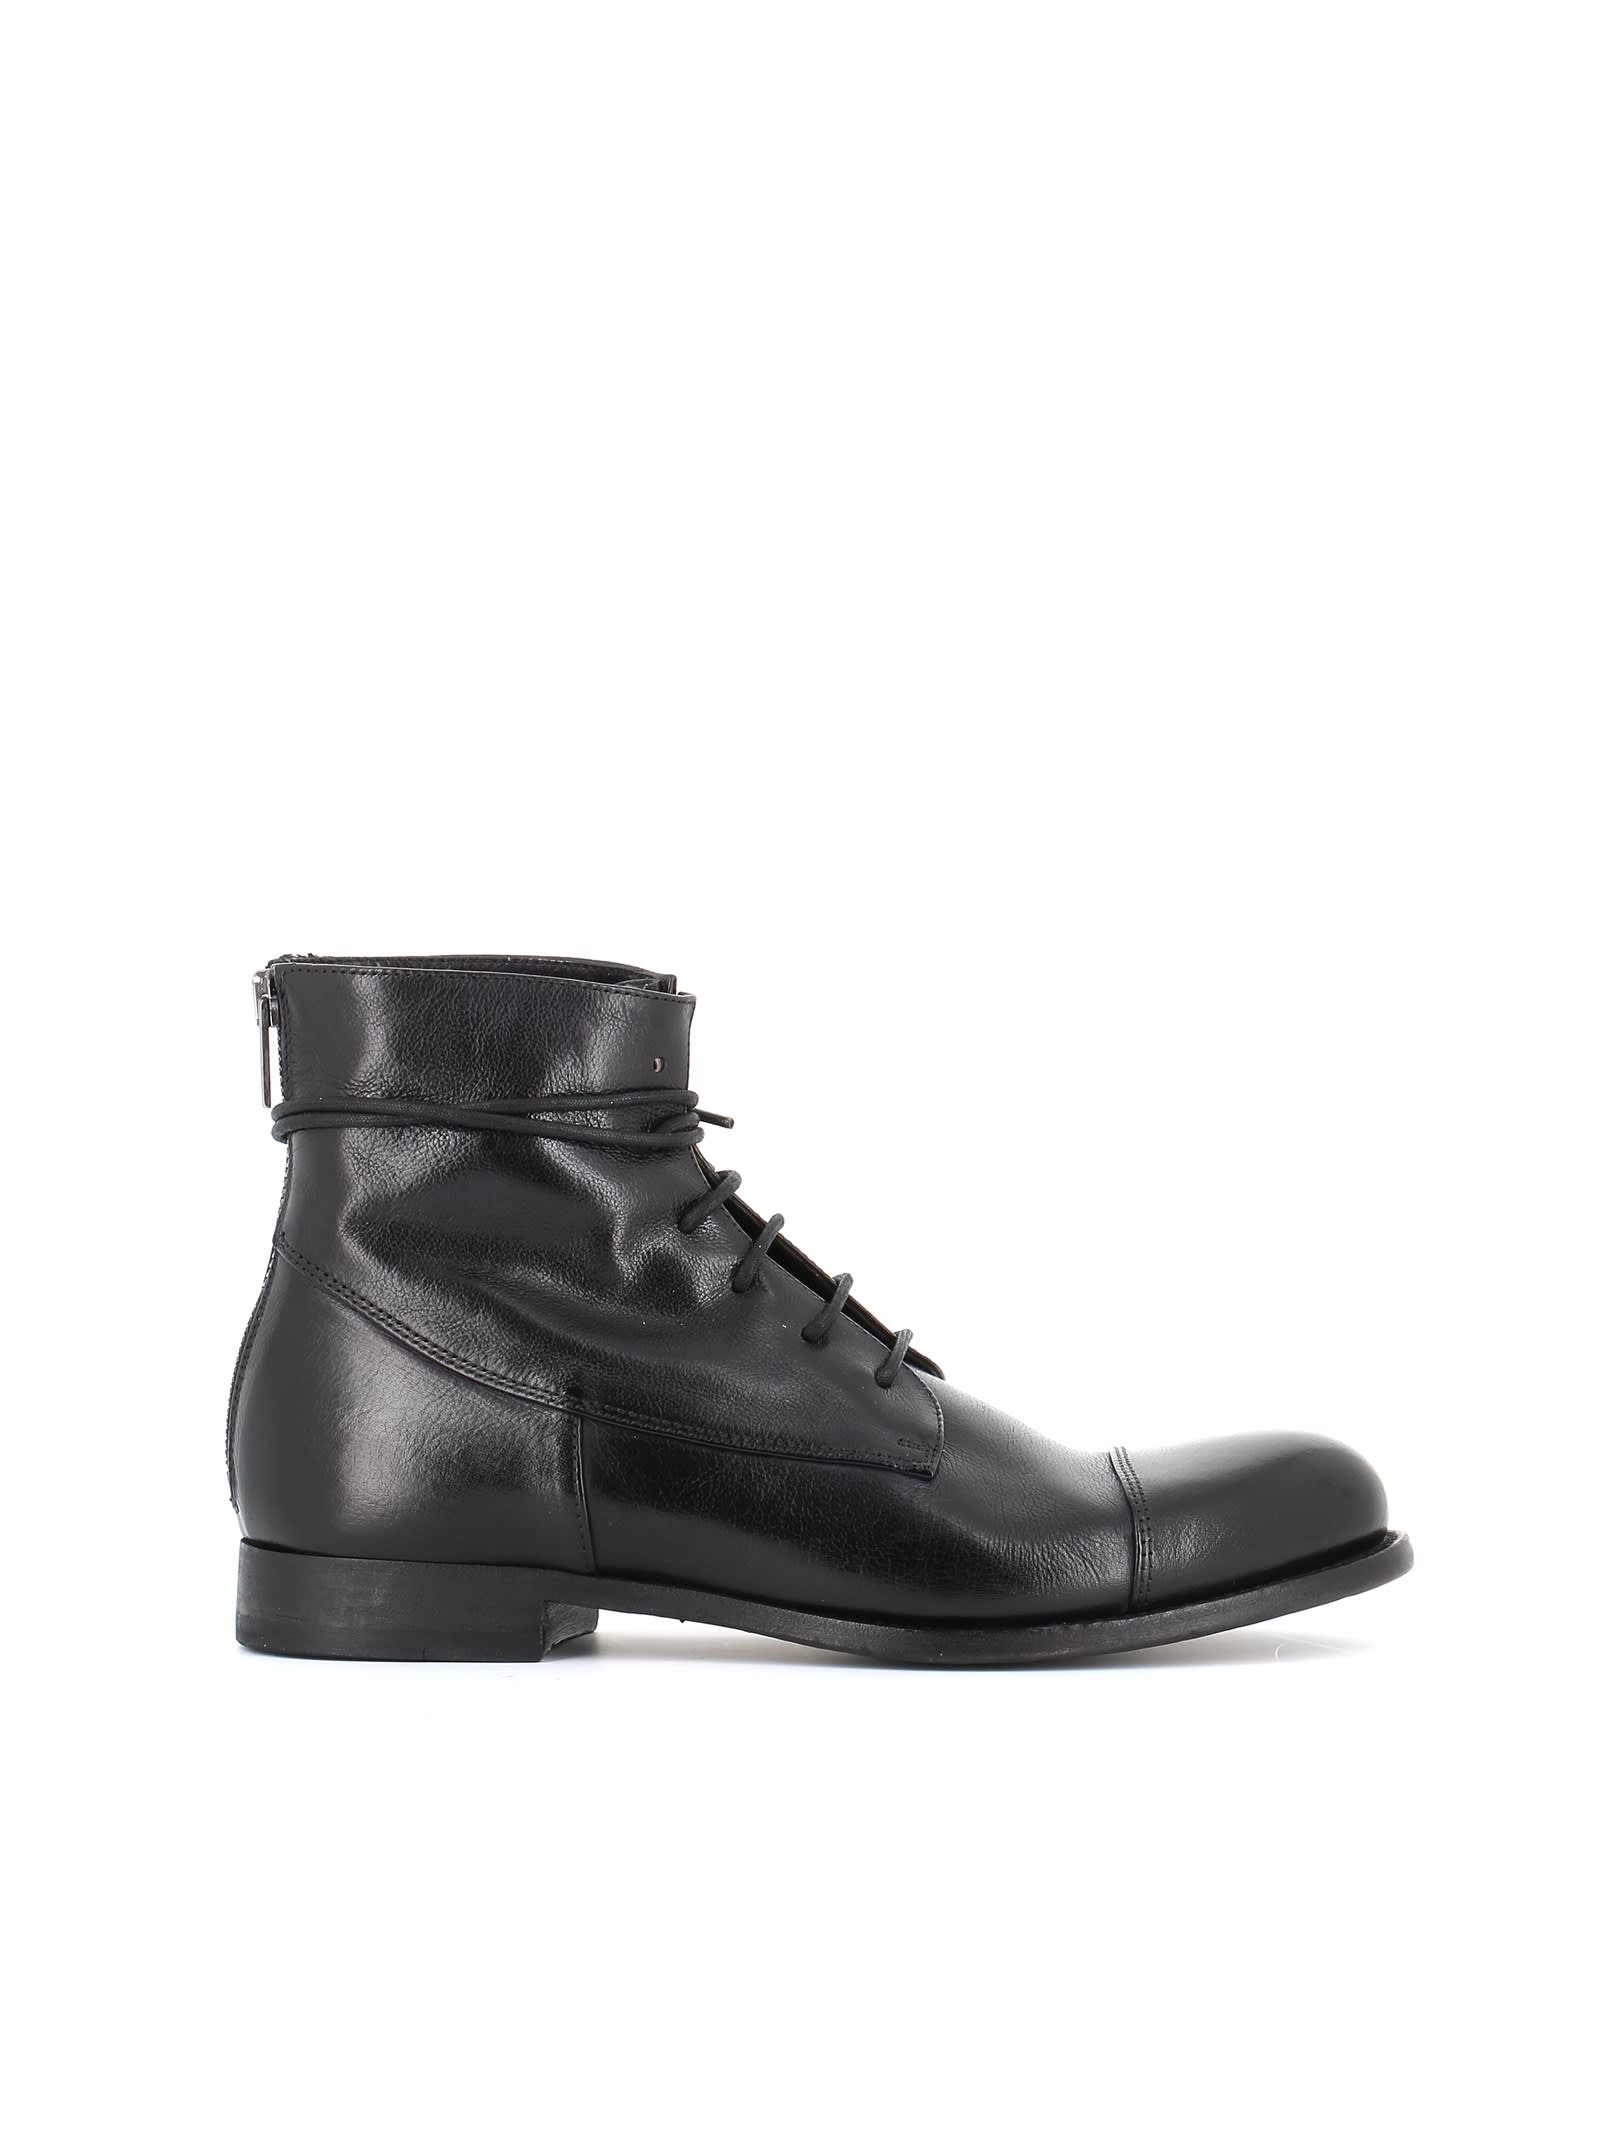 Pantanetti Lace-up Boot 3190d In Black